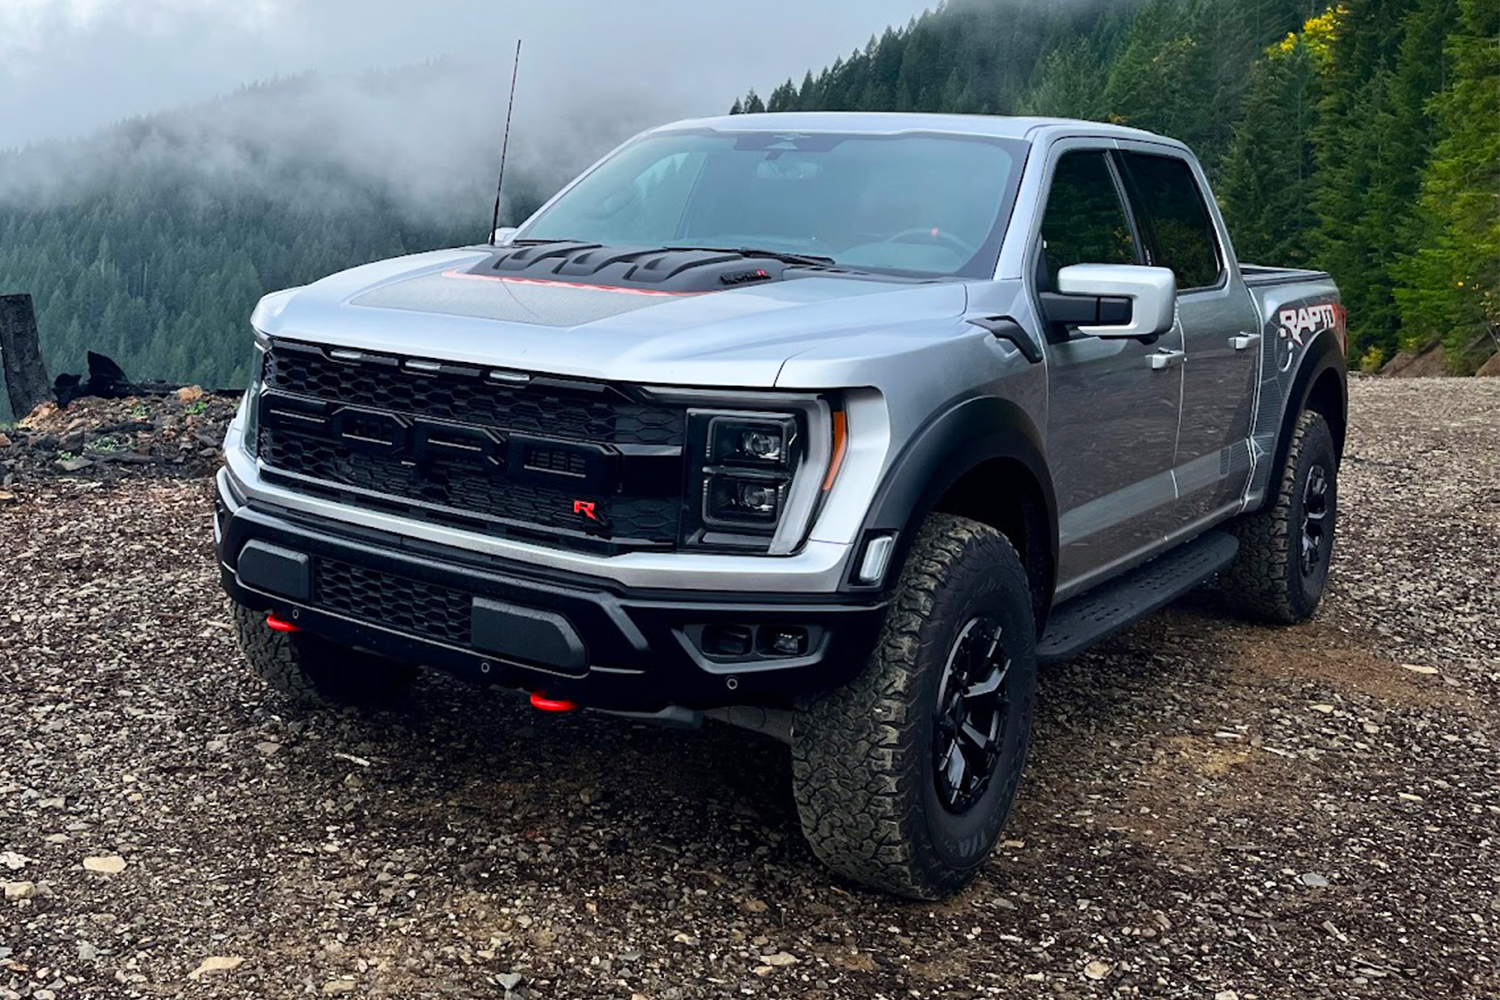 Raptor R: Yet another version of the Ford F-150 - Roseville Today